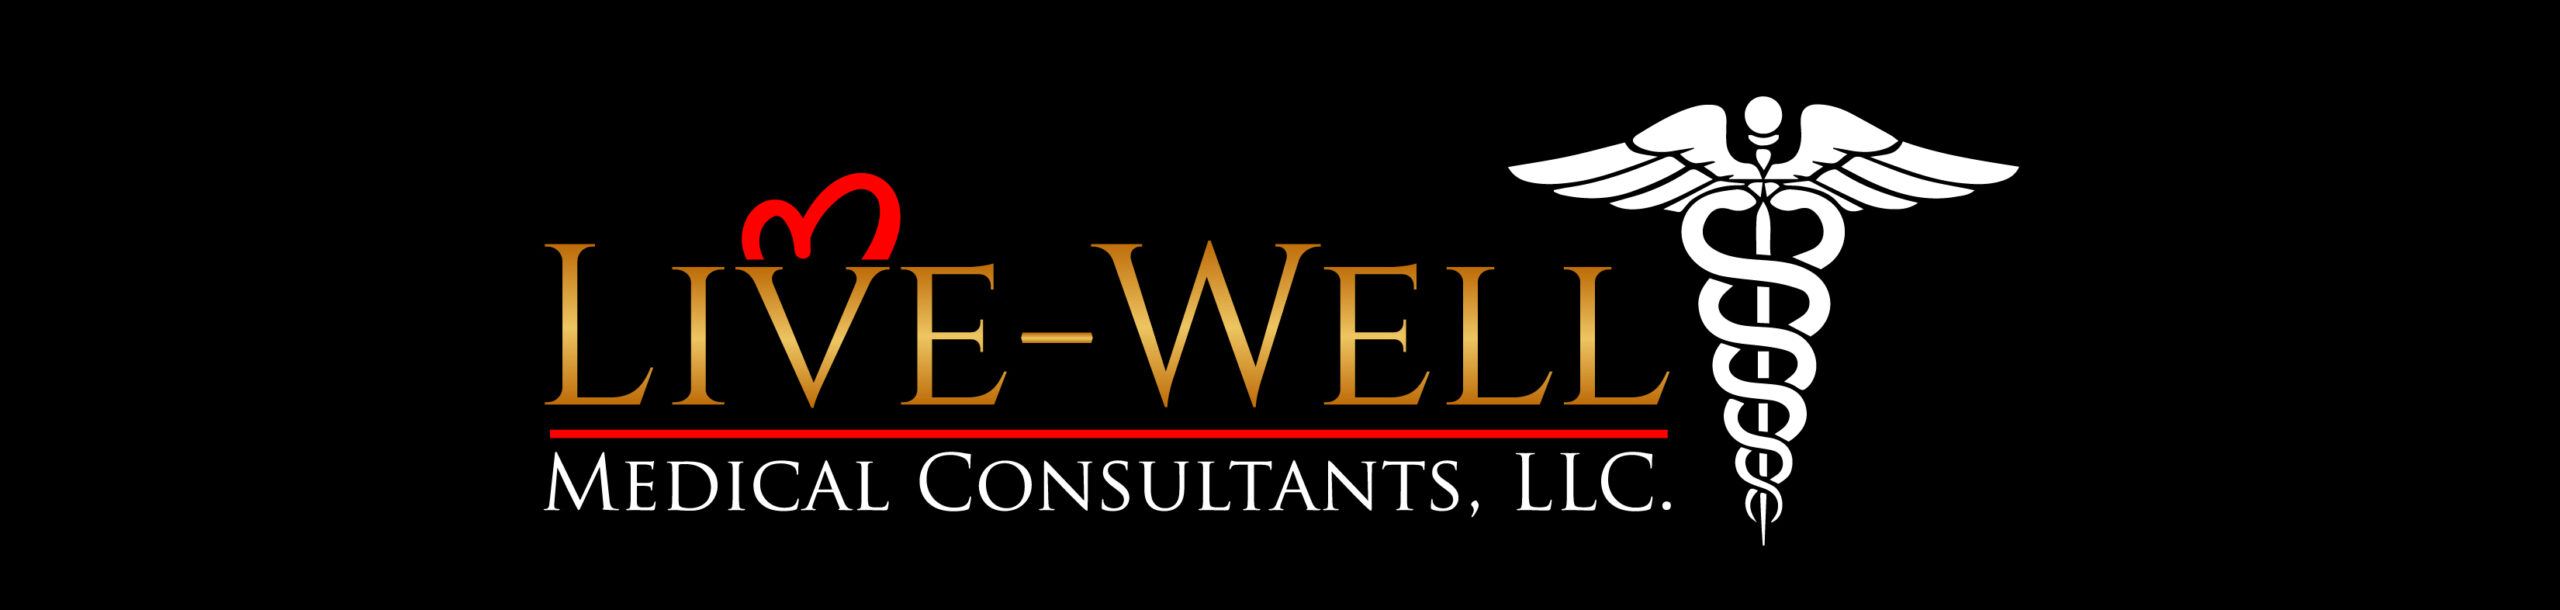 Live-Well Medical Consultants, LLC.